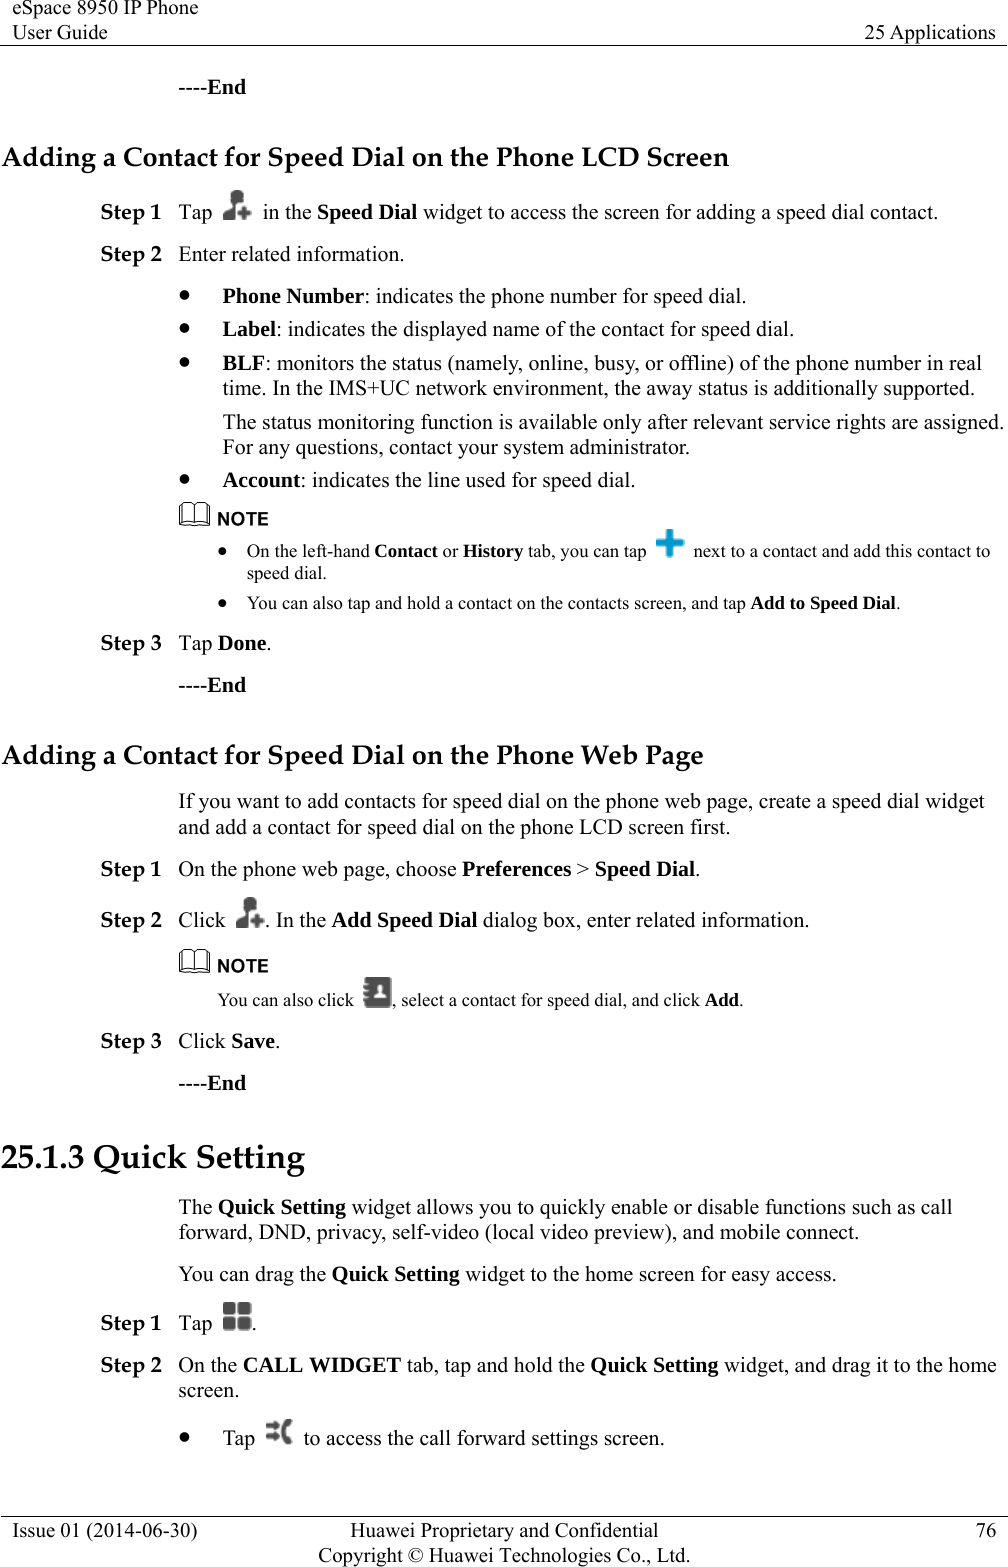 eSpace 8950 IP Phone User Guide  25 Applications Issue 01 (2014-06-30)  Huawei Proprietary and Confidential         Copyright © Huawei Technologies Co., Ltd.76 ----End Adding a Contact for Speed Dial on the Phone LCD Screen Step 1 Tap   in the Speed Dial widget to access the screen for adding a speed dial contact. Step 2 Enter related information.  Phone Number: indicates the phone number for speed dial.  Label: indicates the displayed name of the contact for speed dial.  BLF: monitors the status (namely, online, busy, or offline) of the phone number in real time. In the IMS+UC network environment, the away status is additionally supported.   The status monitoring function is available only after relevant service rights are assigned. For any questions, contact your system administrator.  Account: indicates the line used for speed dial.   On the left-hand Contact or History tab, you can tap    next to a contact and add this contact to speed dial.  You can also tap and hold a contact on the contacts screen, and tap Add to Speed Dial. Step 3 Tap Done. ----End Adding a Contact for Speed Dial on the Phone Web Page If you want to add contacts for speed dial on the phone web page, create a speed dial widget and add a contact for speed dial on the phone LCD screen first.   Step 1 On the phone web page, choose Preferences &gt; Speed Dial. Step 2 Click  . In the Add Speed Dial dialog box, enter related information.  You can also click  , select a contact for speed dial, and click Add. Step 3 Click Save. ----End 25.1.3 Quick Setting The Quick Setting widget allows you to quickly enable or disable functions such as call forward, DND, privacy, self-video (local video preview), and mobile connect. You can drag the Quick Setting widget to the home screen for easy access. Step 1 Tap  . Step 2 On the CALL WIDGET tab, tap and hold the Quick Setting widget, and drag it to the home screen.  Tap    to access the call forward settings screen. 